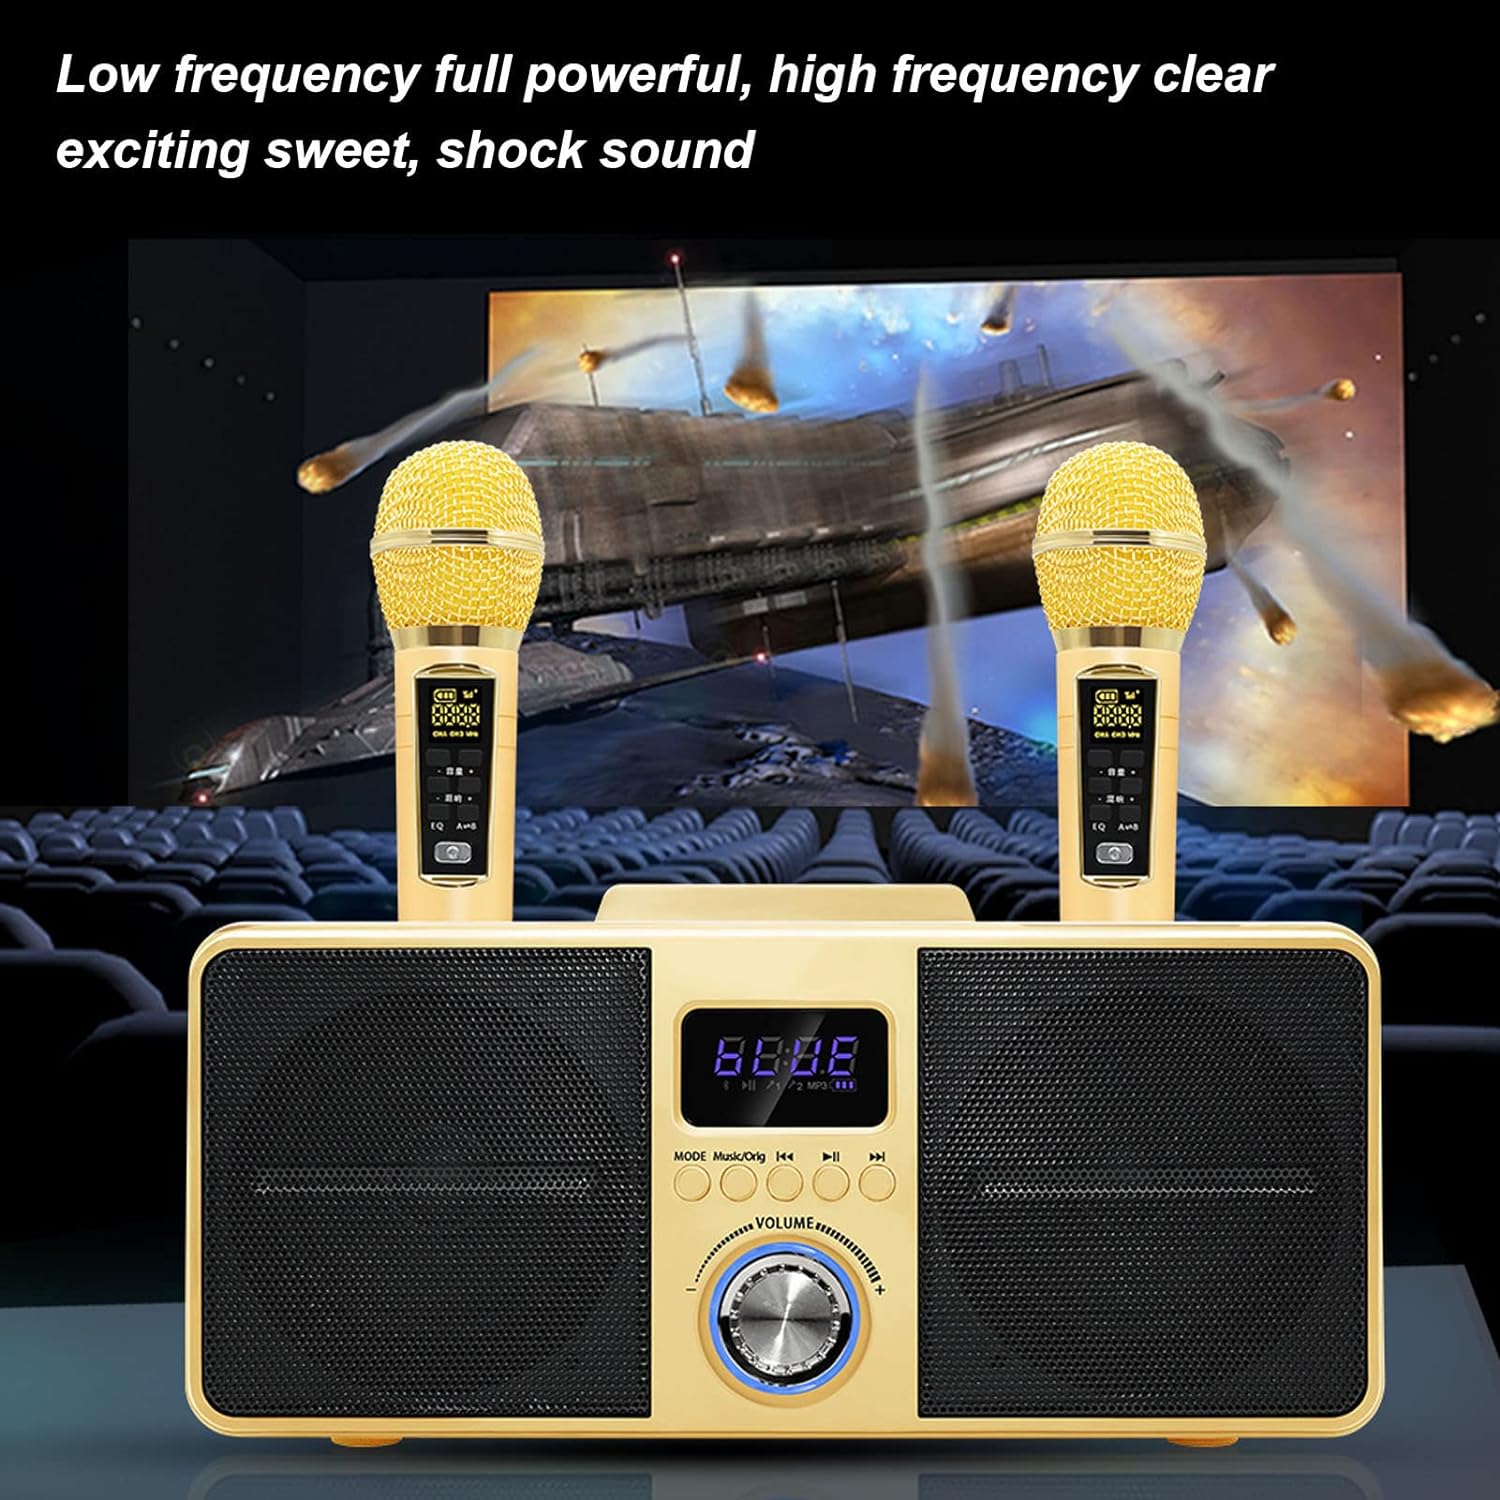 PUSOKEI Karaoke Machine, Portable Karaoke Speakers with 2 Wireless Microphones, Wireless Speaker System for KTV at Home, Gift for Adults and Kids